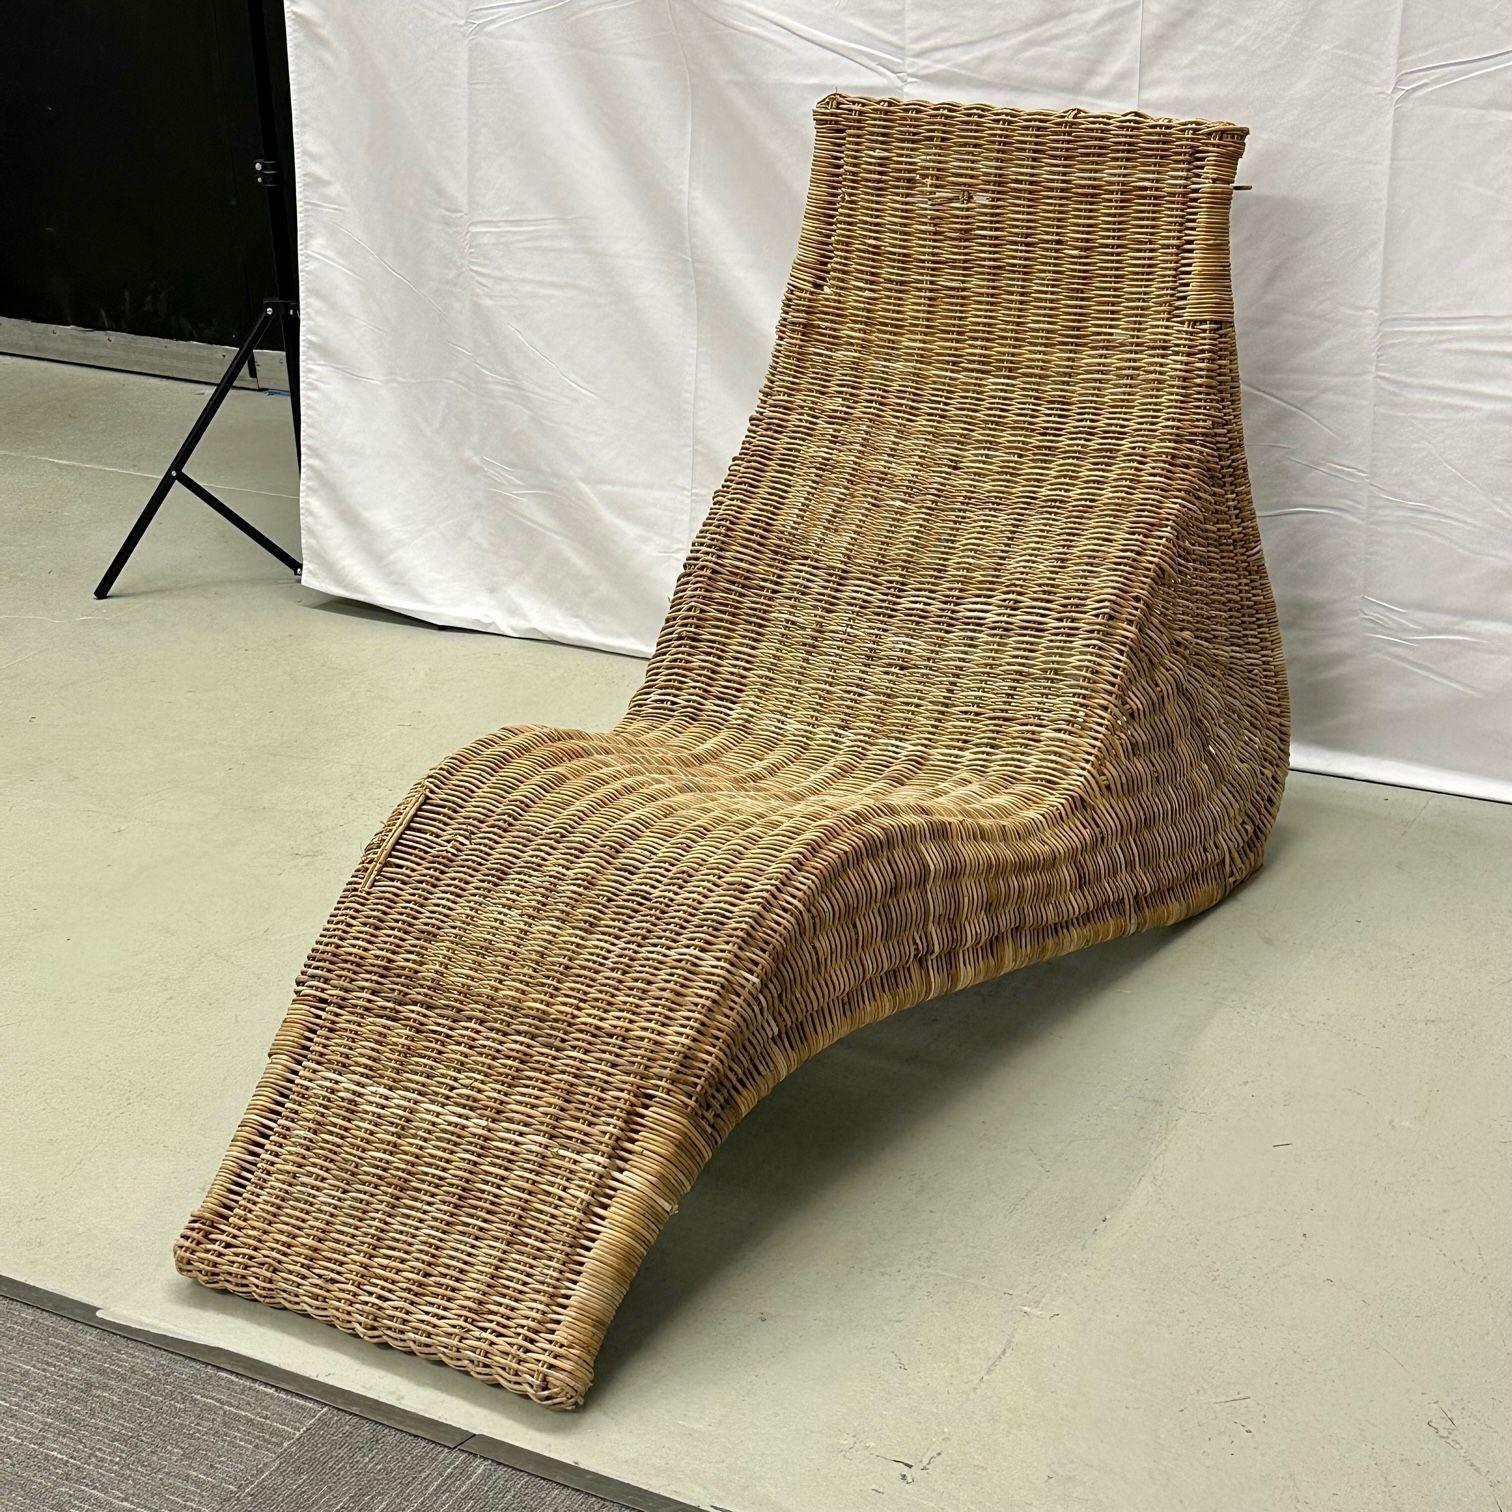 Pair Bohemian Mid-Century Modern Karlskrona Rattan Wicker Chaise Lounge Chairs For Sale 2